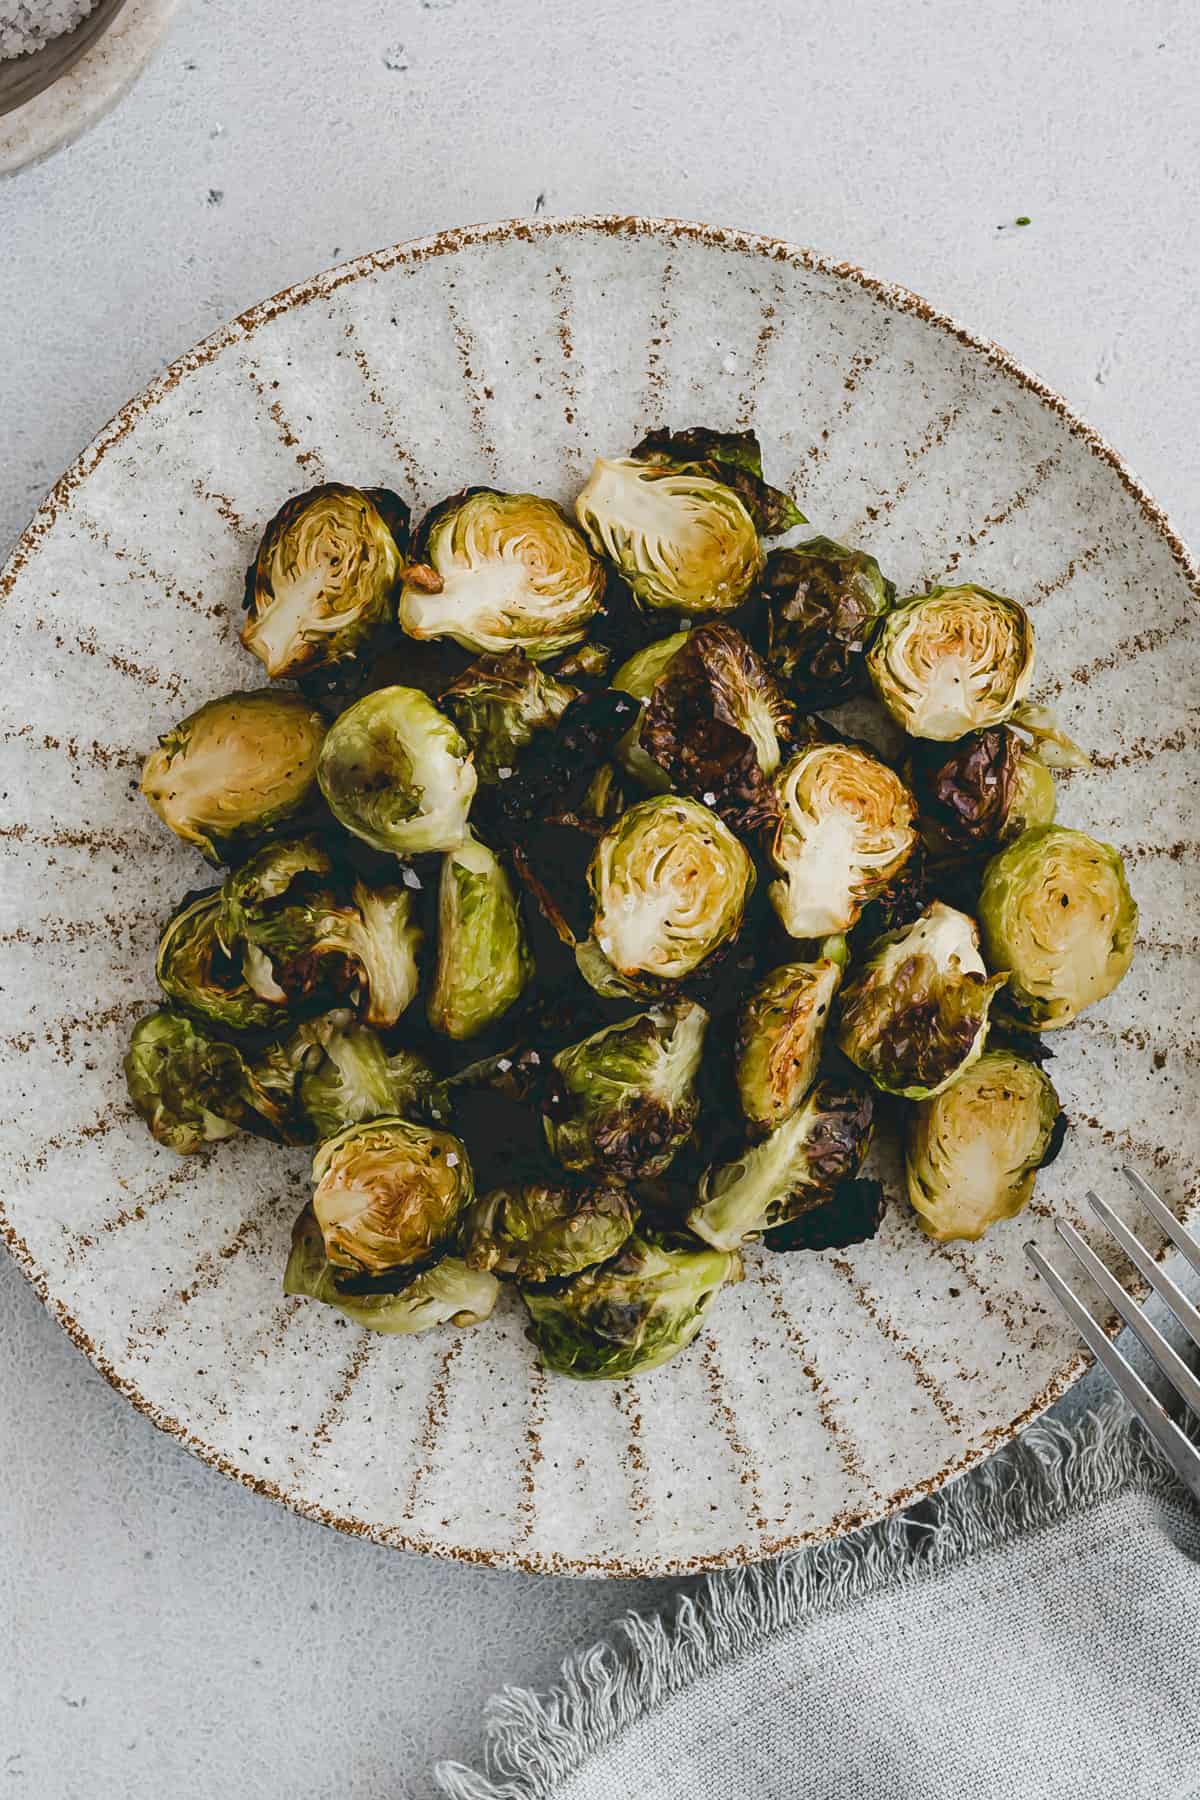 baked brussels sprouts on a serving platter